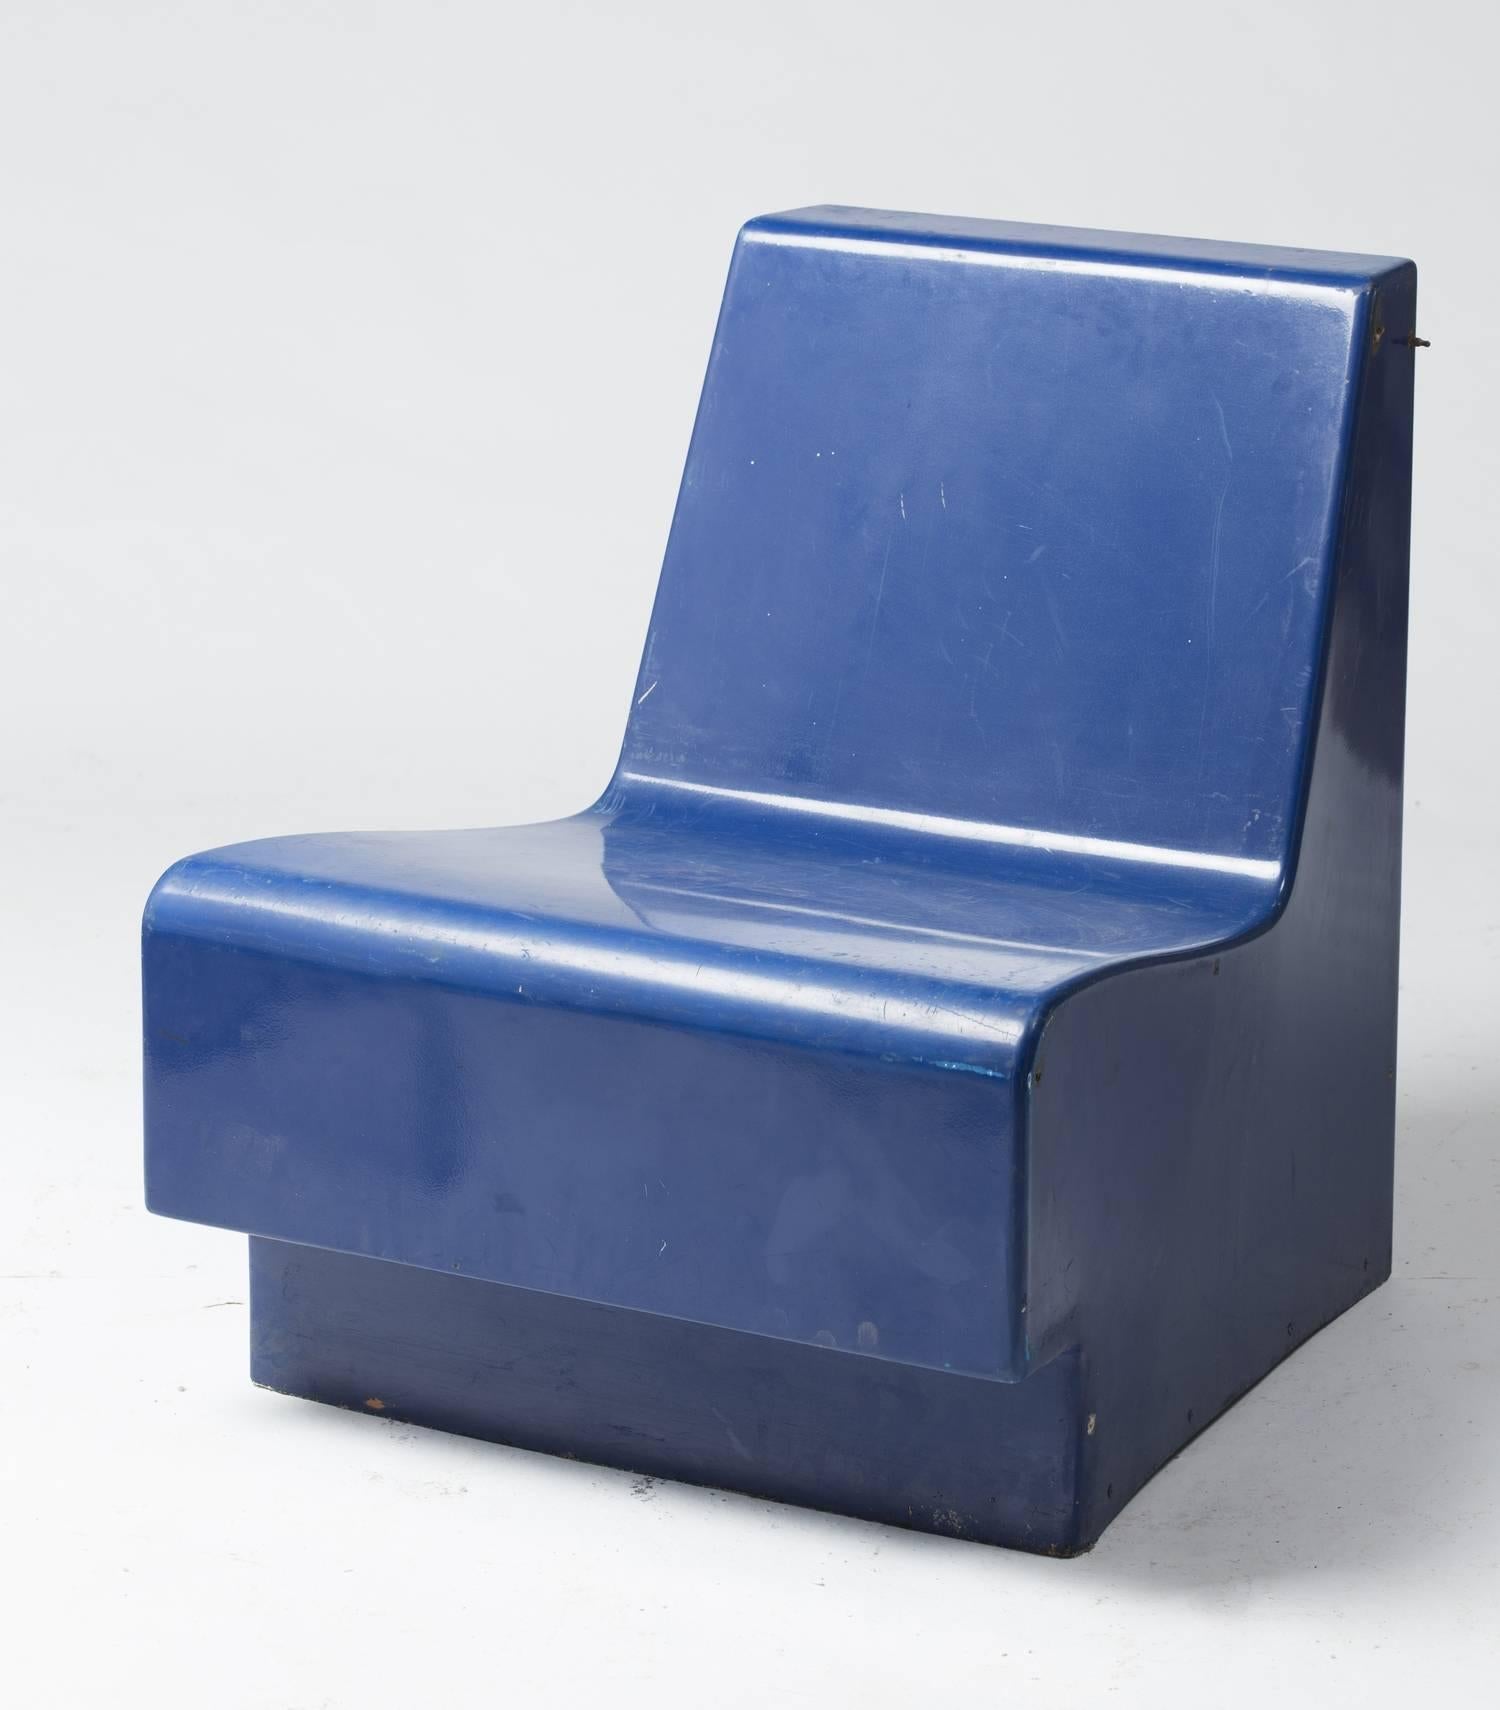 Set of modular seats in fiberglass and polyester lacquered in three colors, created in 1975 by Joseph-André Motte for Lyon-Satolas airport.
There are at least 65 items, they were placed indoors, in the lobby, but it can also make an interesting set